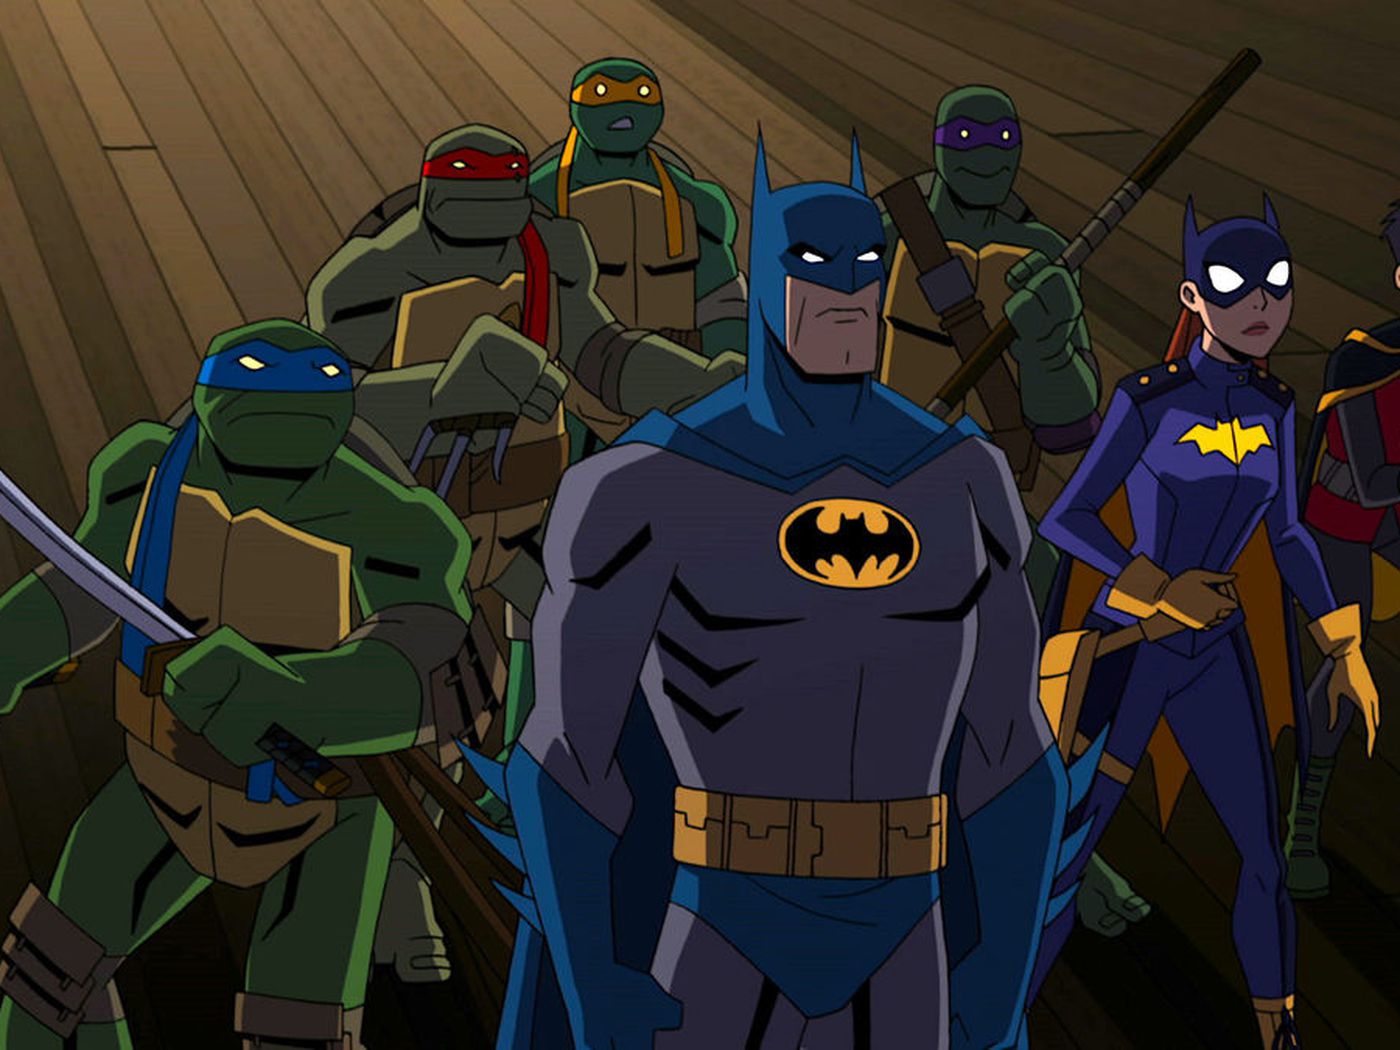 Batman teams with the Ninja Turtles in a new animated film - Polygon